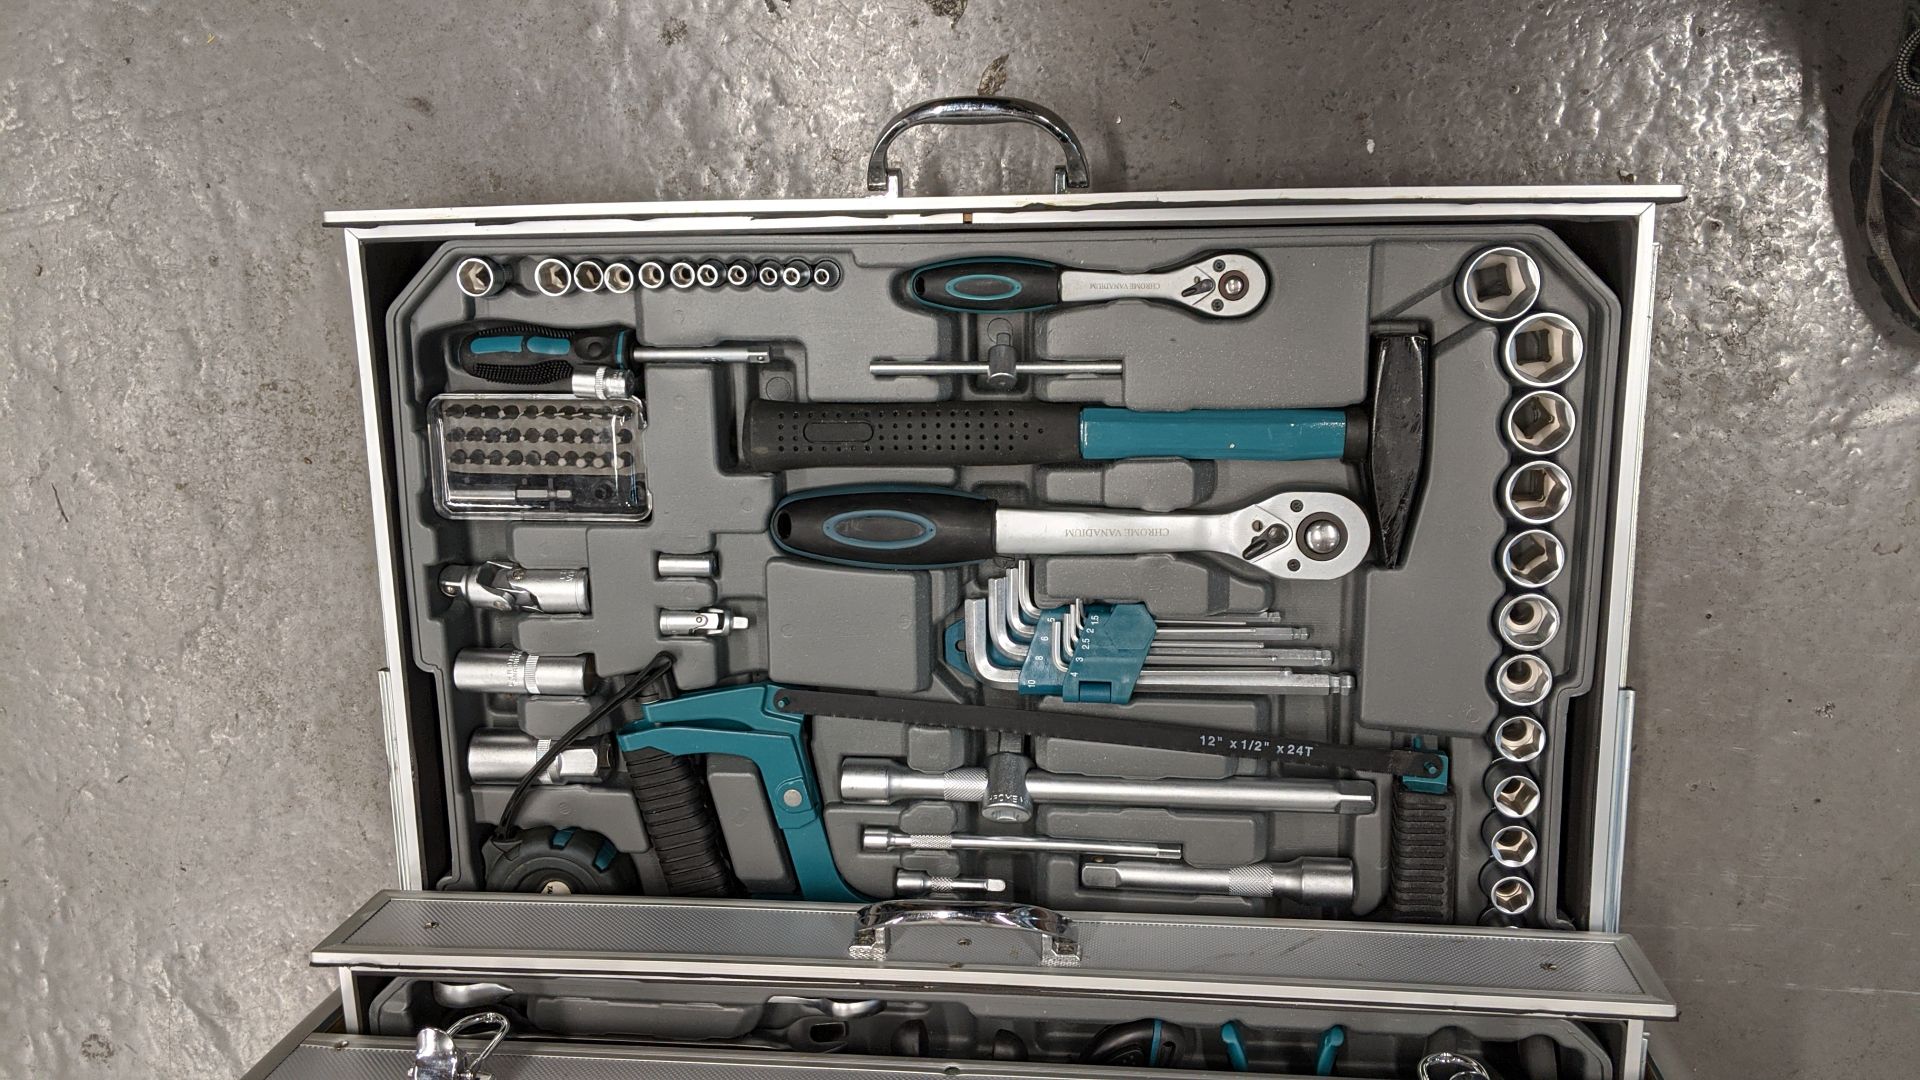 Silverline metal tool chest and contents which includes cordless drill and torch with battery and - Image 9 of 15